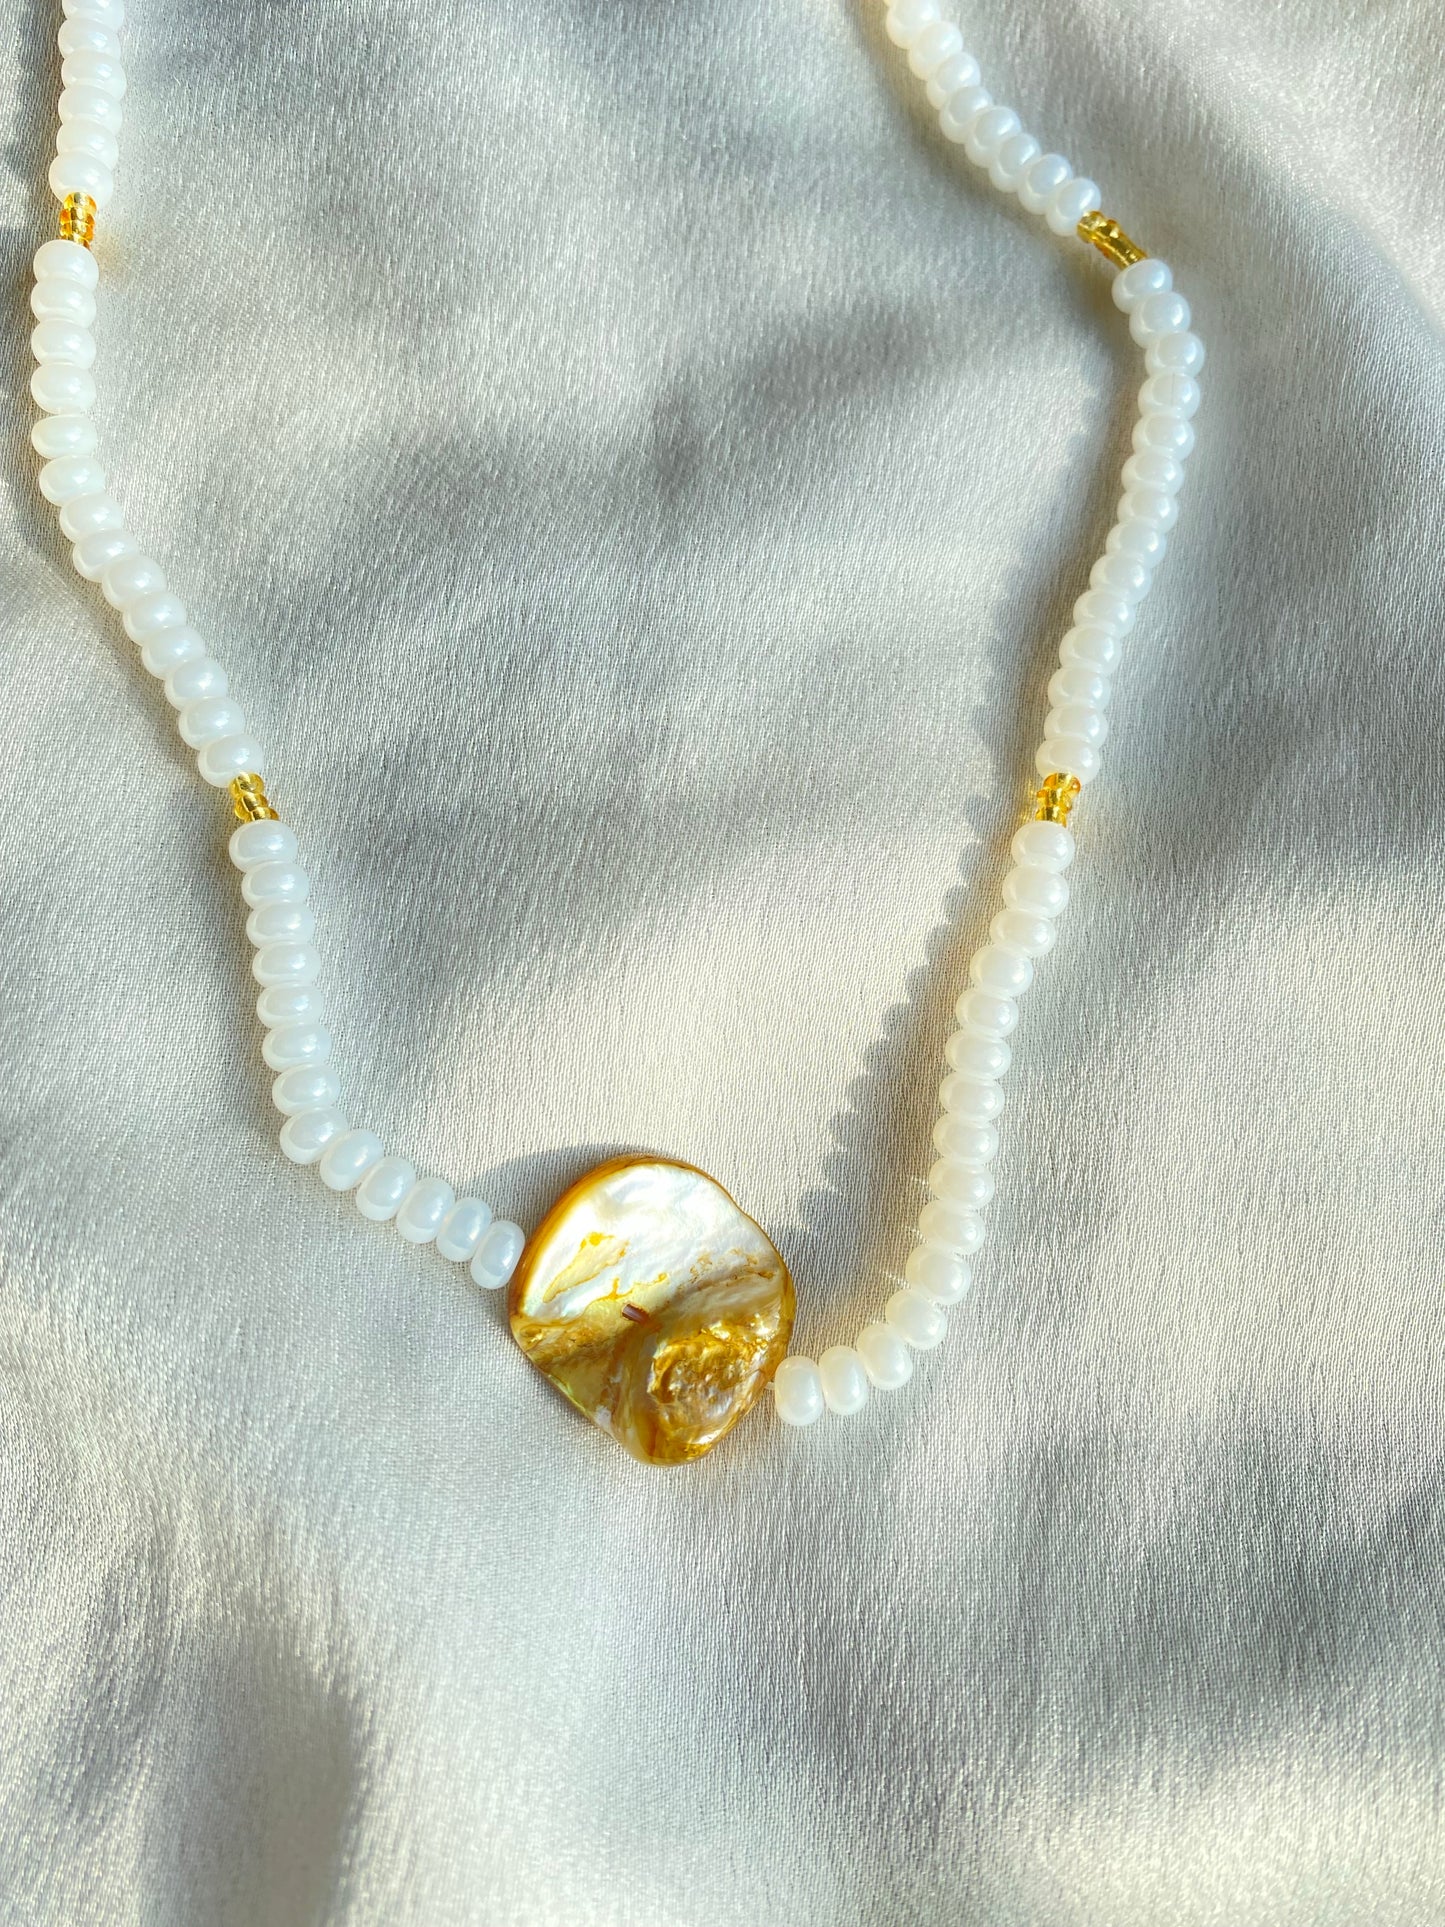 Tranquility Pearl necklace